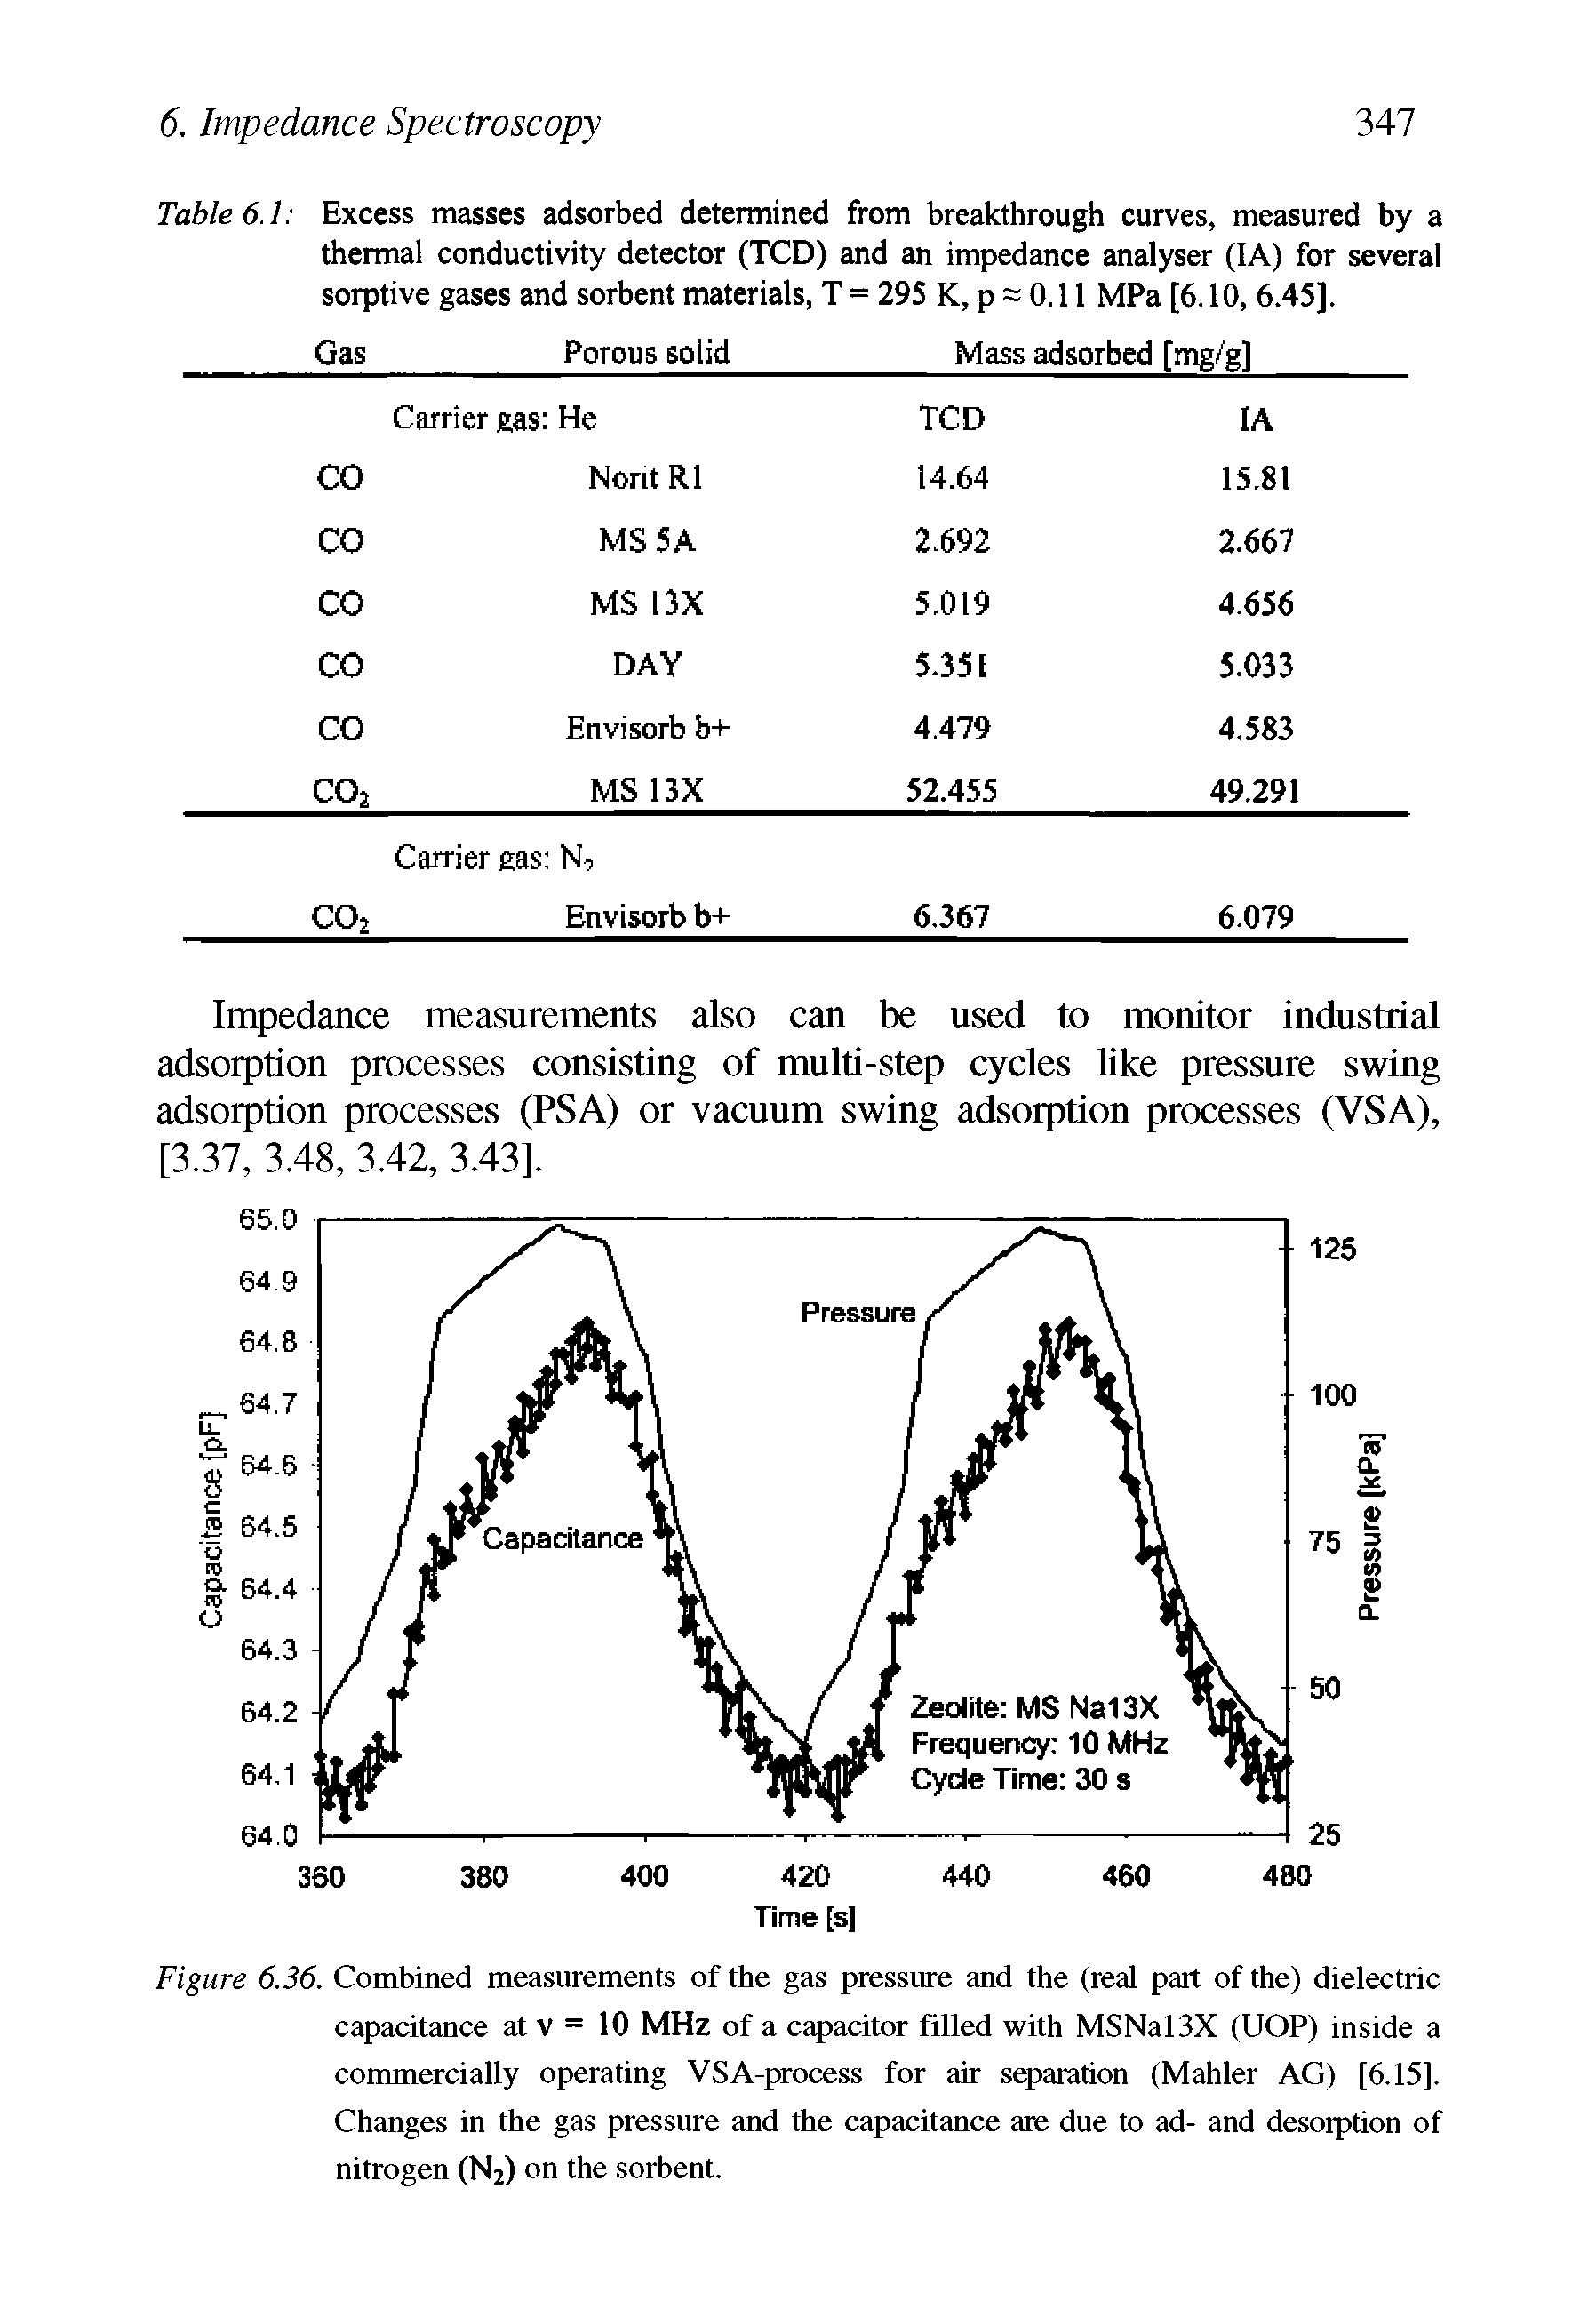 Figure 6.36. Combined measurements of the gas pressure and the (real part of the) dielectric capacitance at v = 10 MHz of a capacitor filled with MSNal3X (UOP) inside a commercially operating VSA-process for air separation (Mahler AG) [6.15]. Changes in the gas pressure and the capacitance are due to ad- and desorption of nitrogen (N2) on the sorbent.